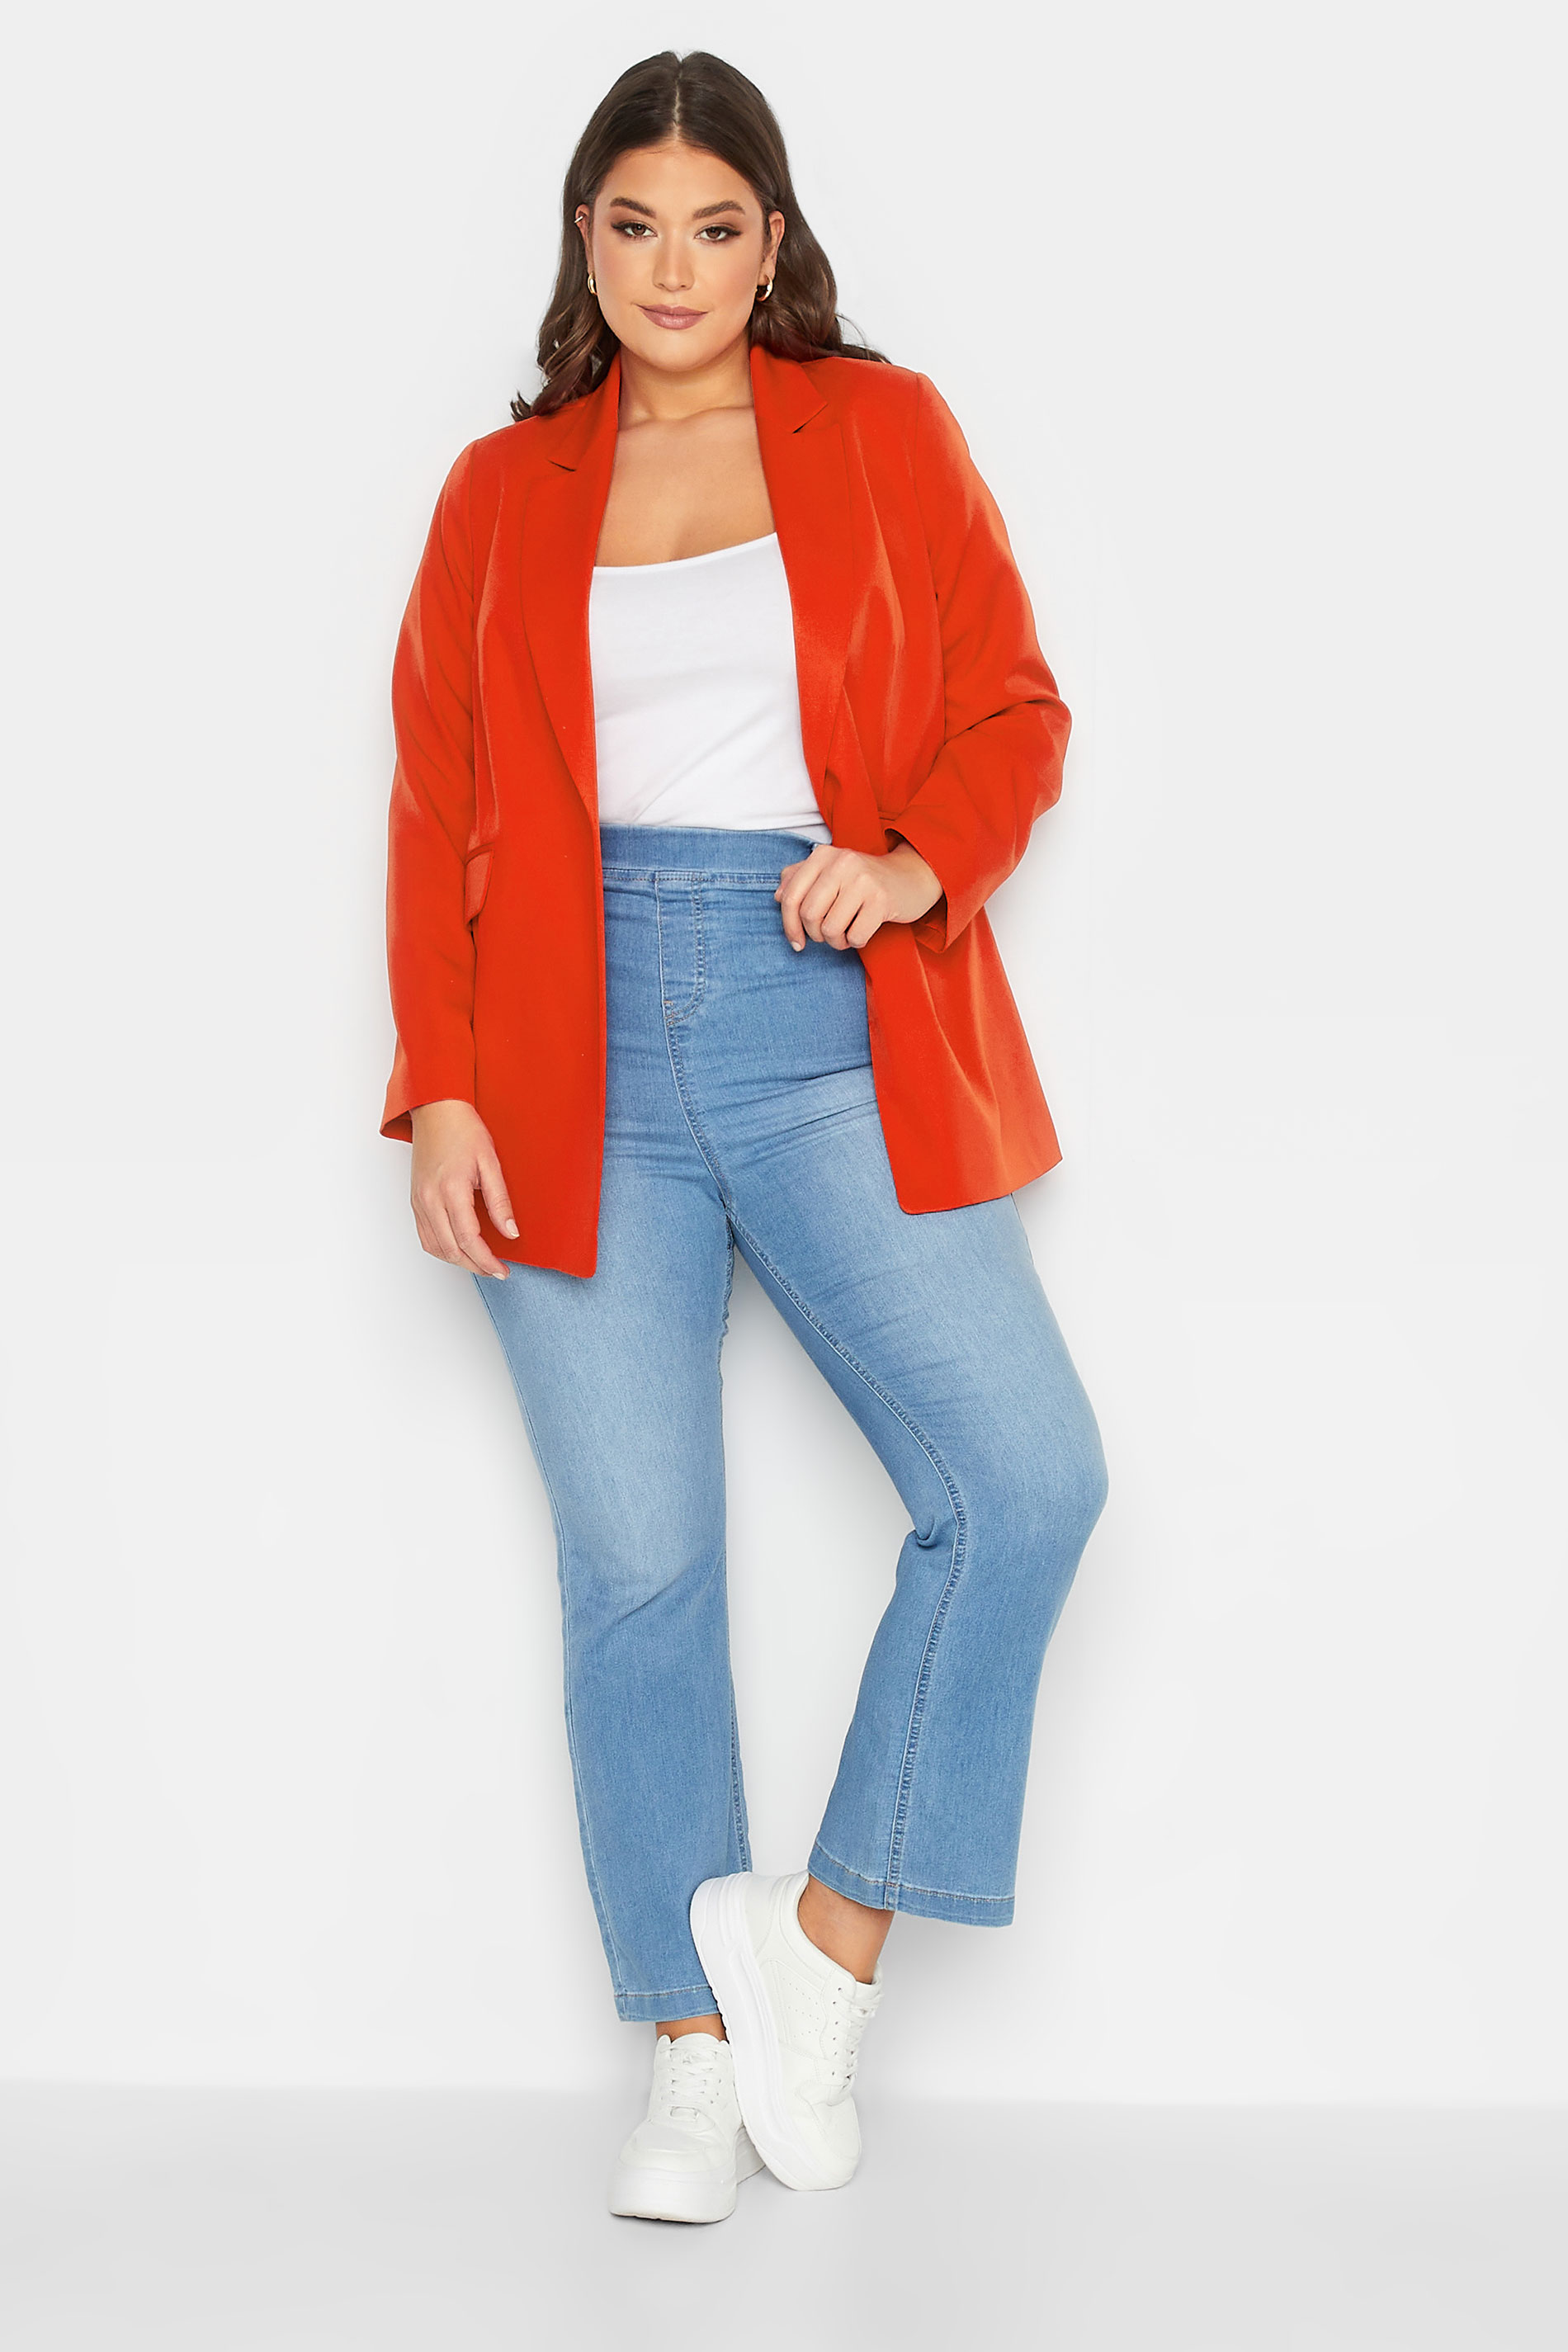 YOURS Plus Size Red Blazer | Yours Clothing  3